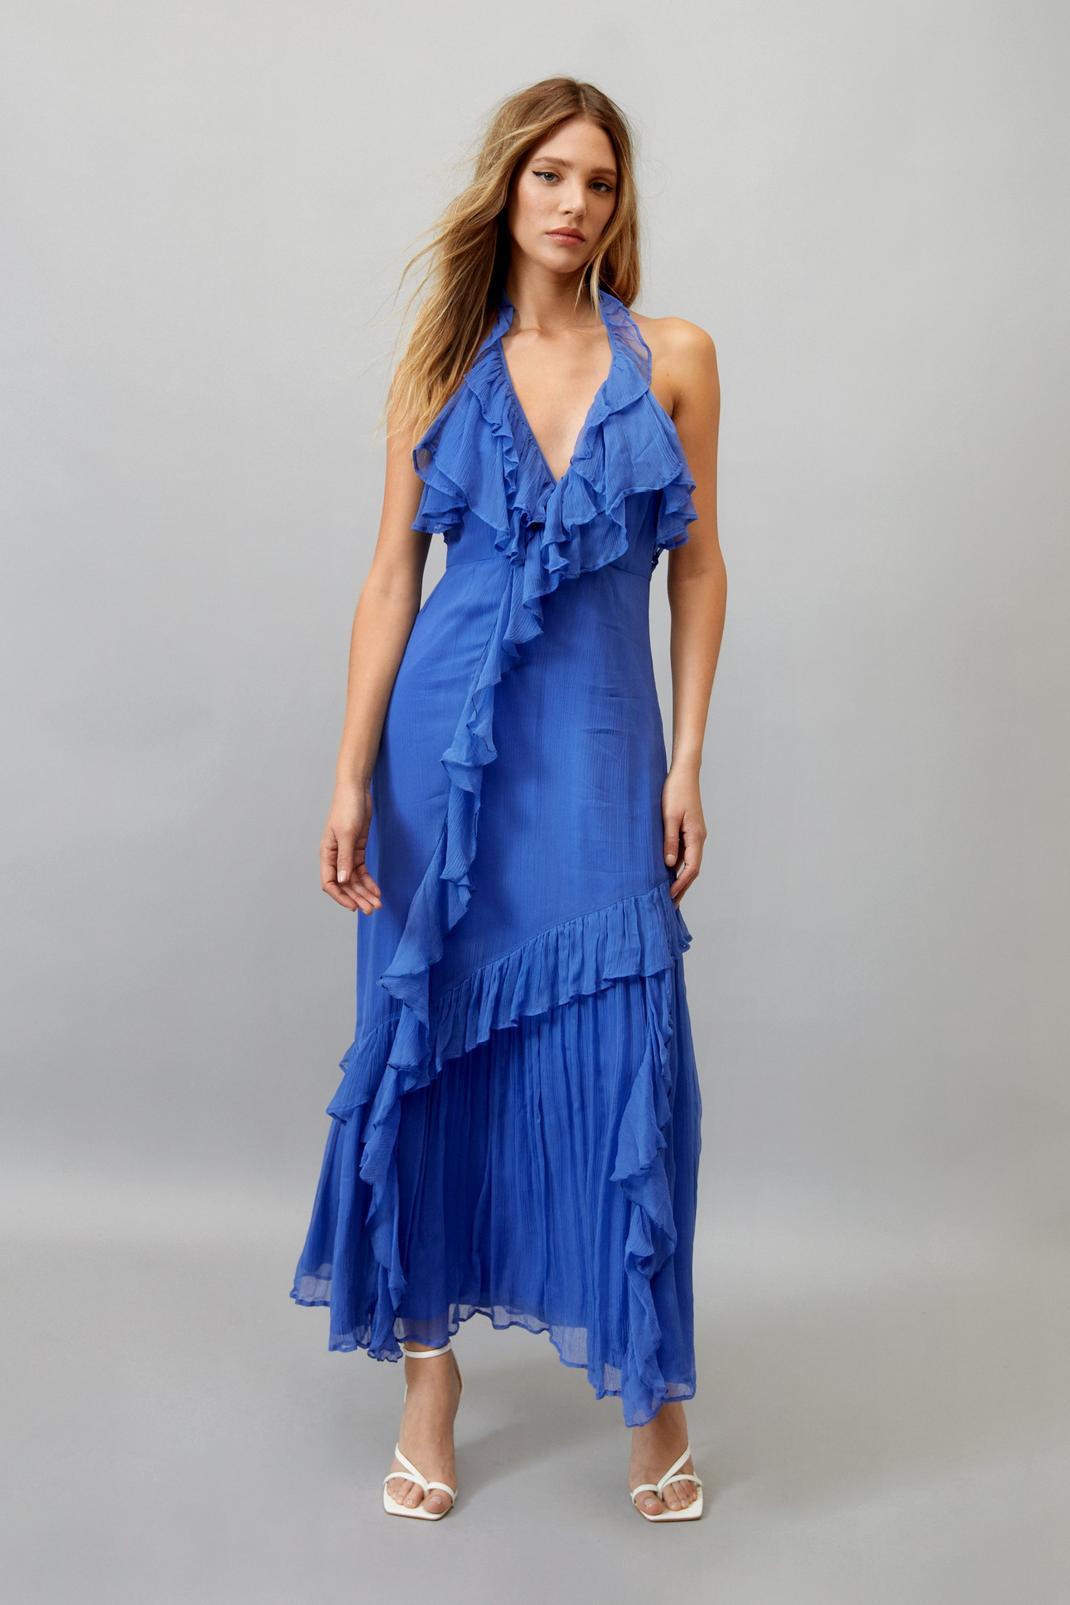 The Endless Summer In The Moment Dress by at Free People